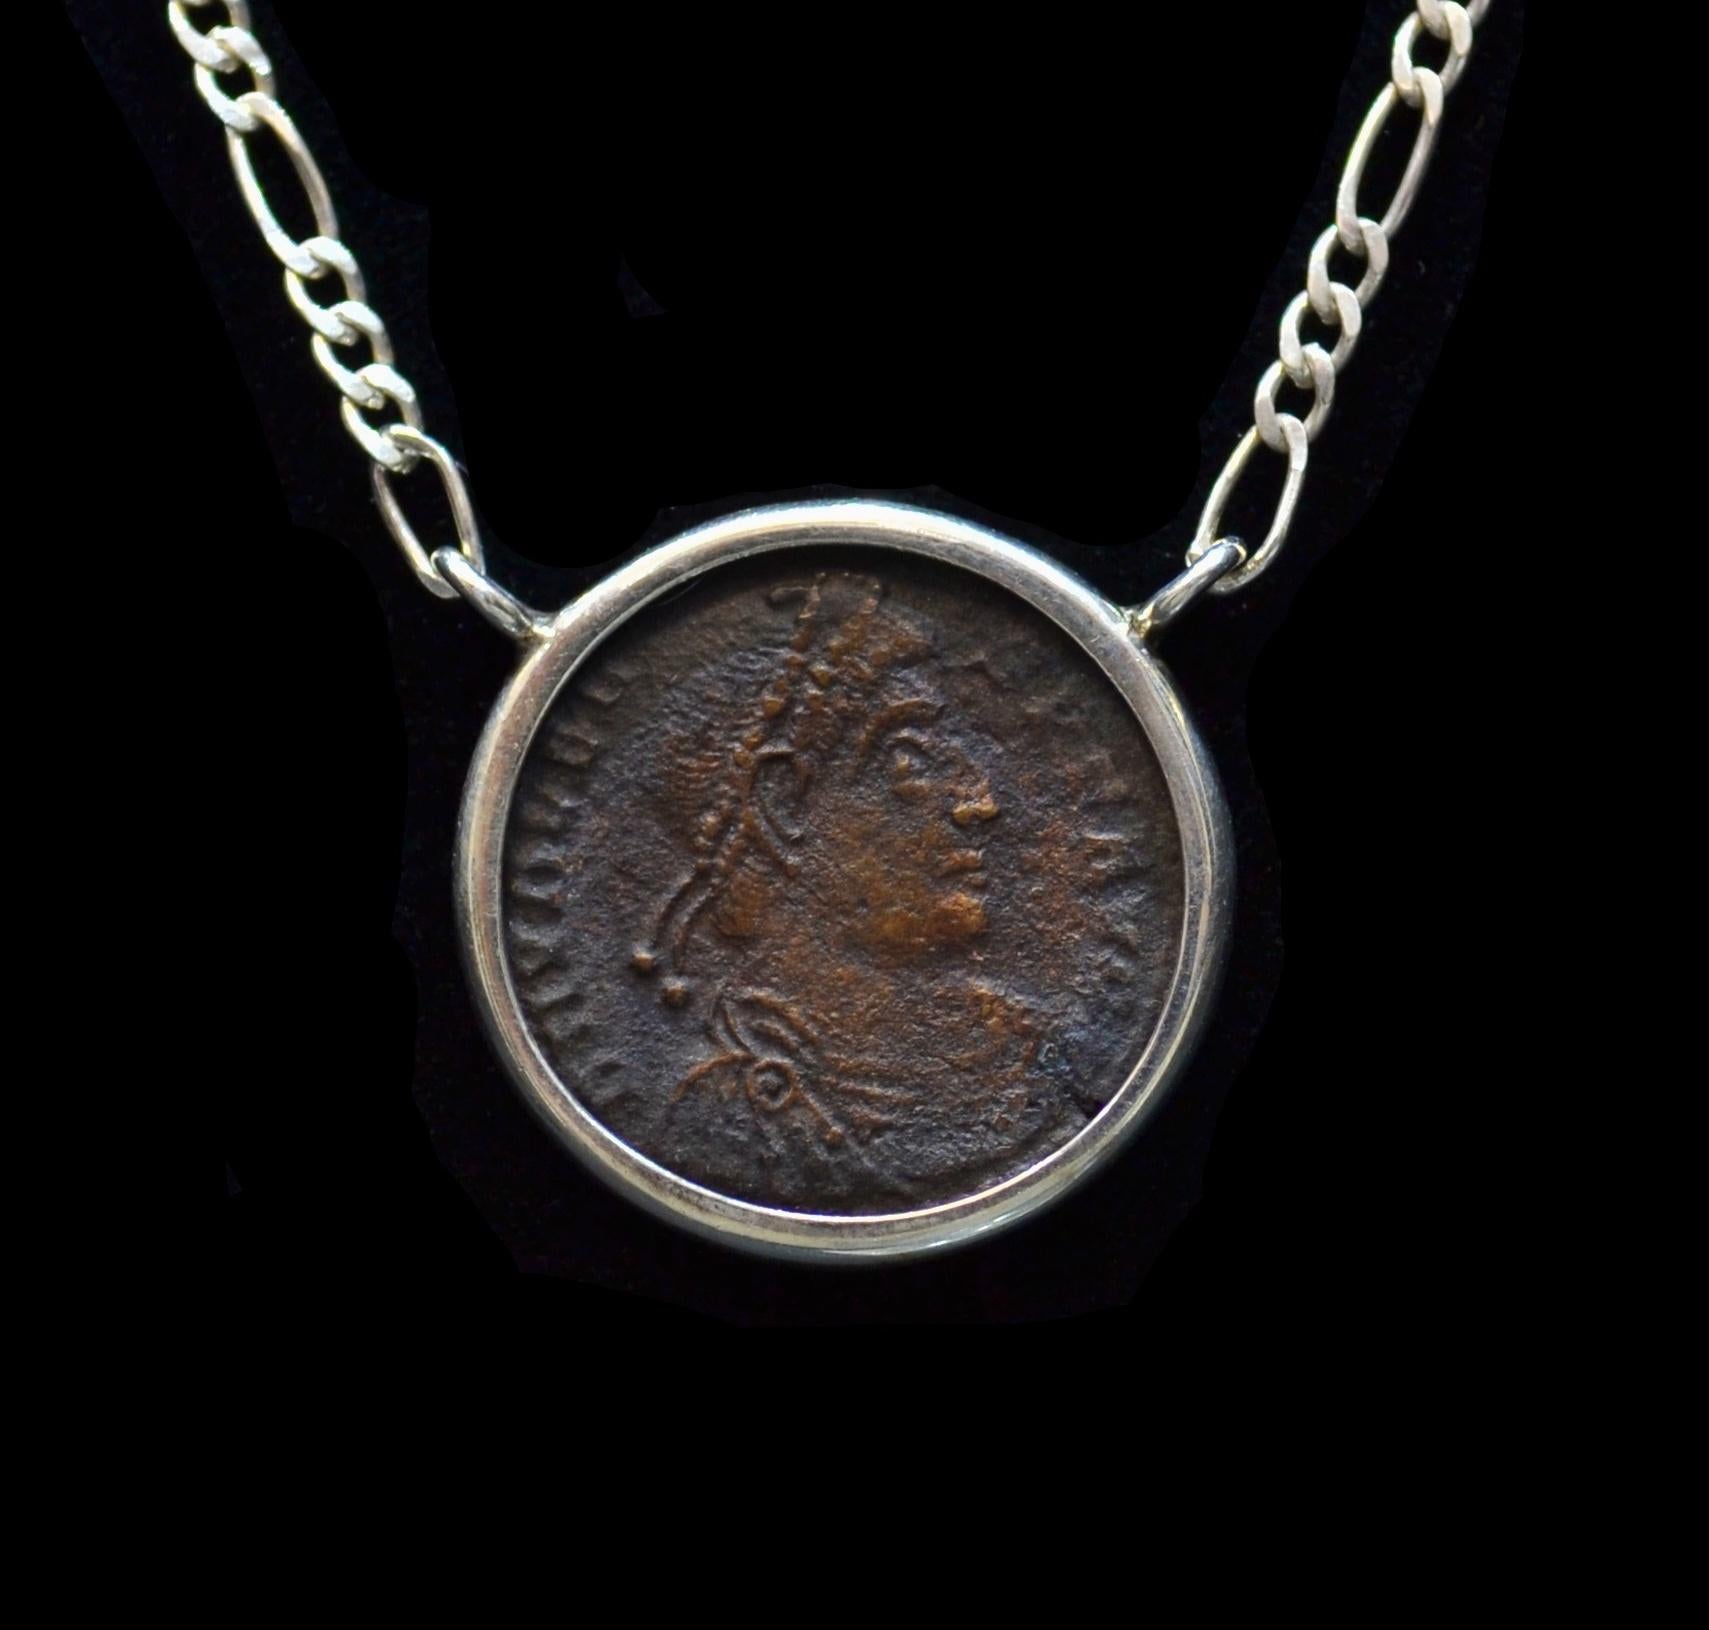 Authentic Roman bronze coin ca. 364-375 CE  mounted on contemporary silver necklace. Ready to be worn!

Also known as Valentinian the Great, upon becoming emperor he made his brother Valens his co-emperor, giving him rule of the eastern provinces.